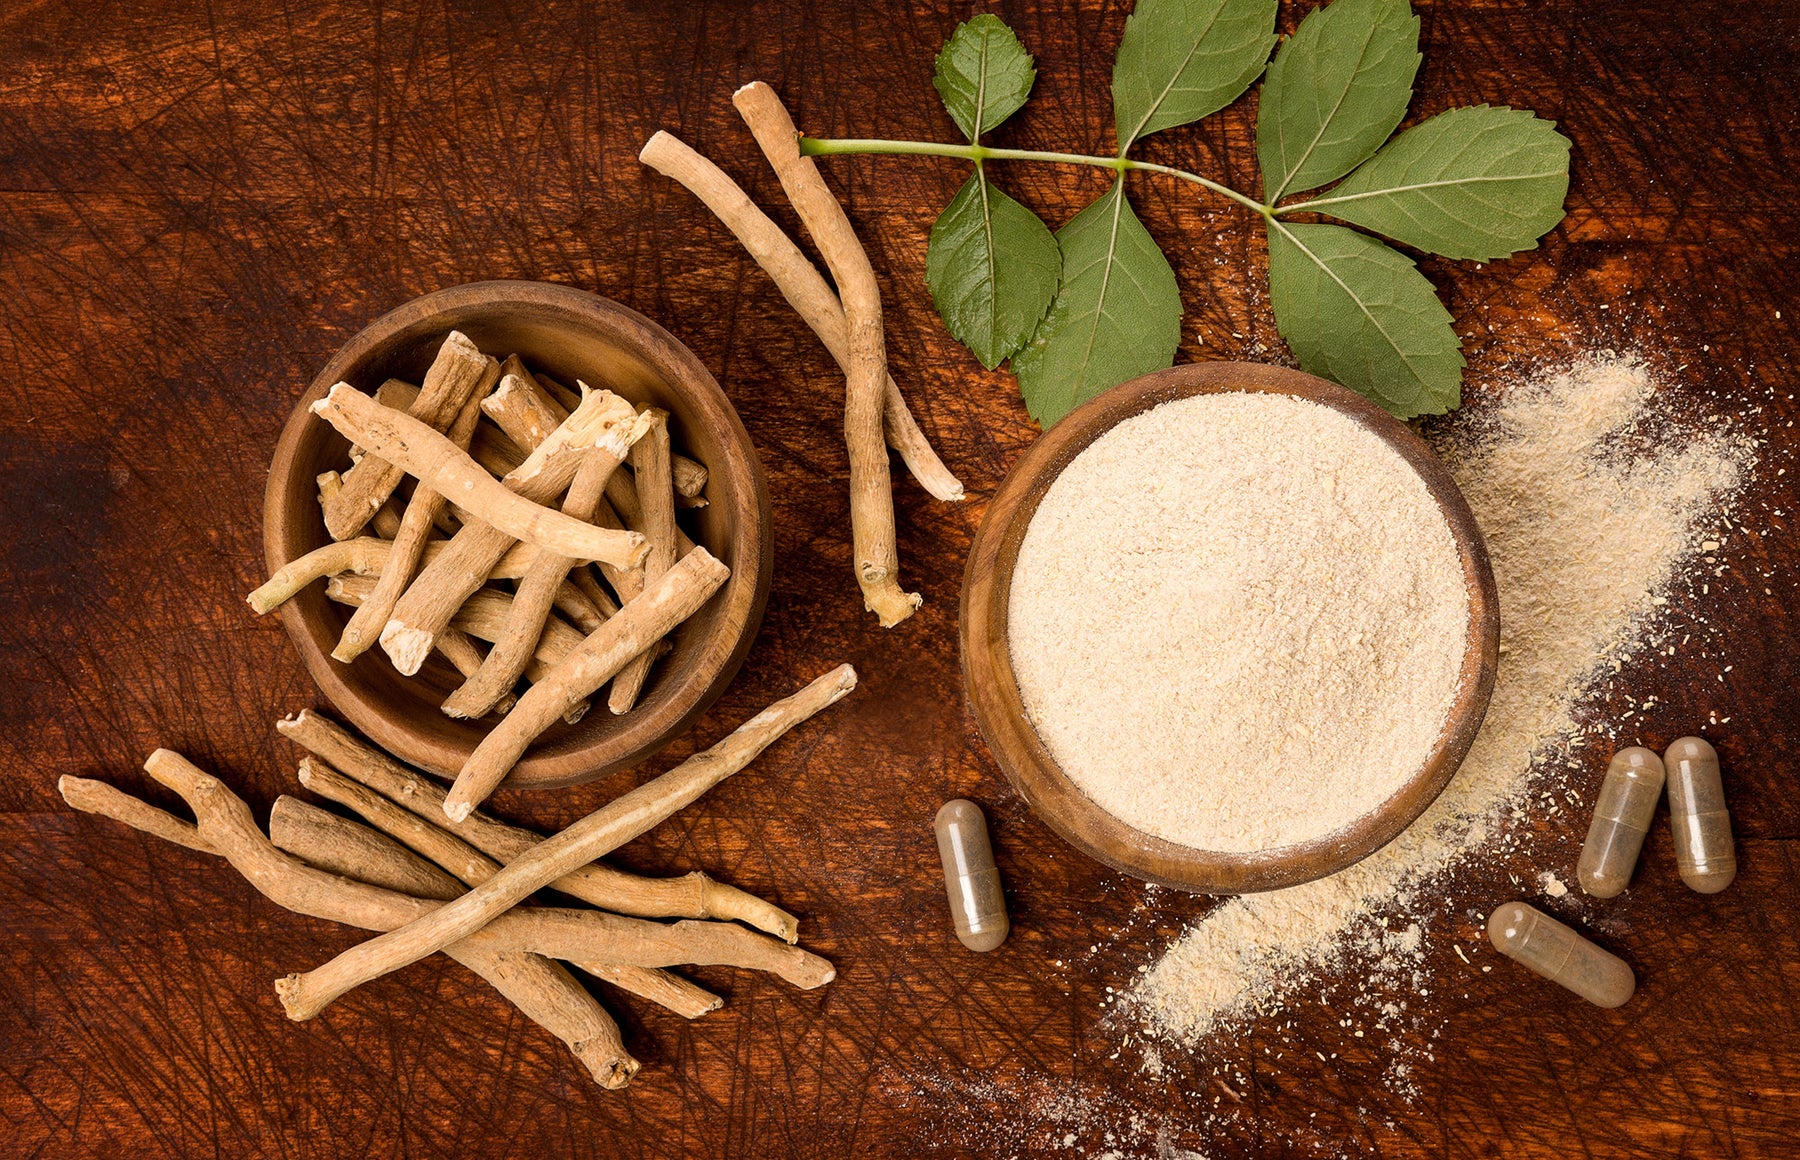 Ashwagandhat: The Adaptogen for Achieving Optimal Health